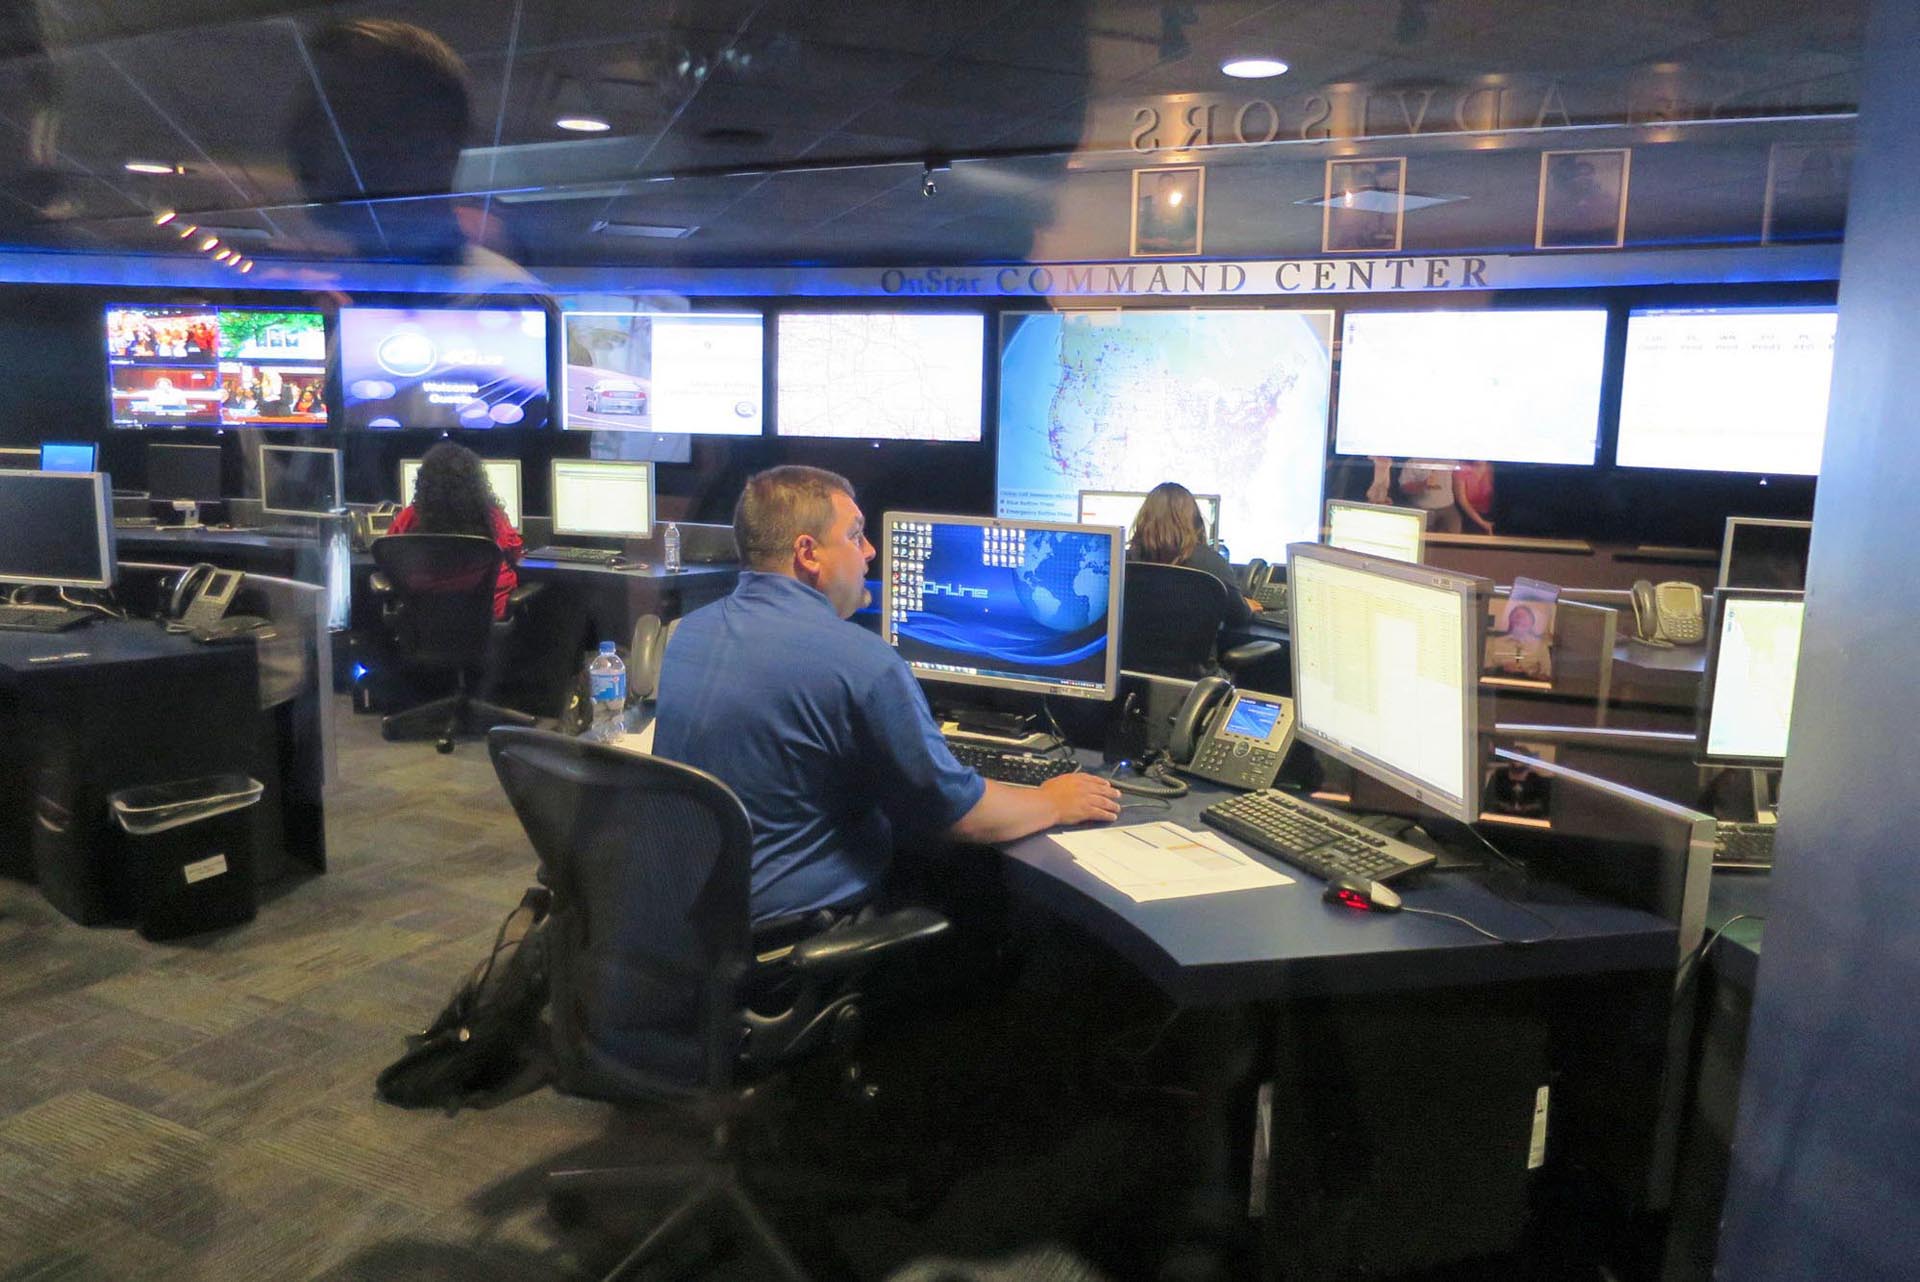 Media also had a chance to visit the OnStar Command Center, located in the Renaissance Center in downtown Detroit. This is where research is done to refine the OnStar connected experience and develop new services.